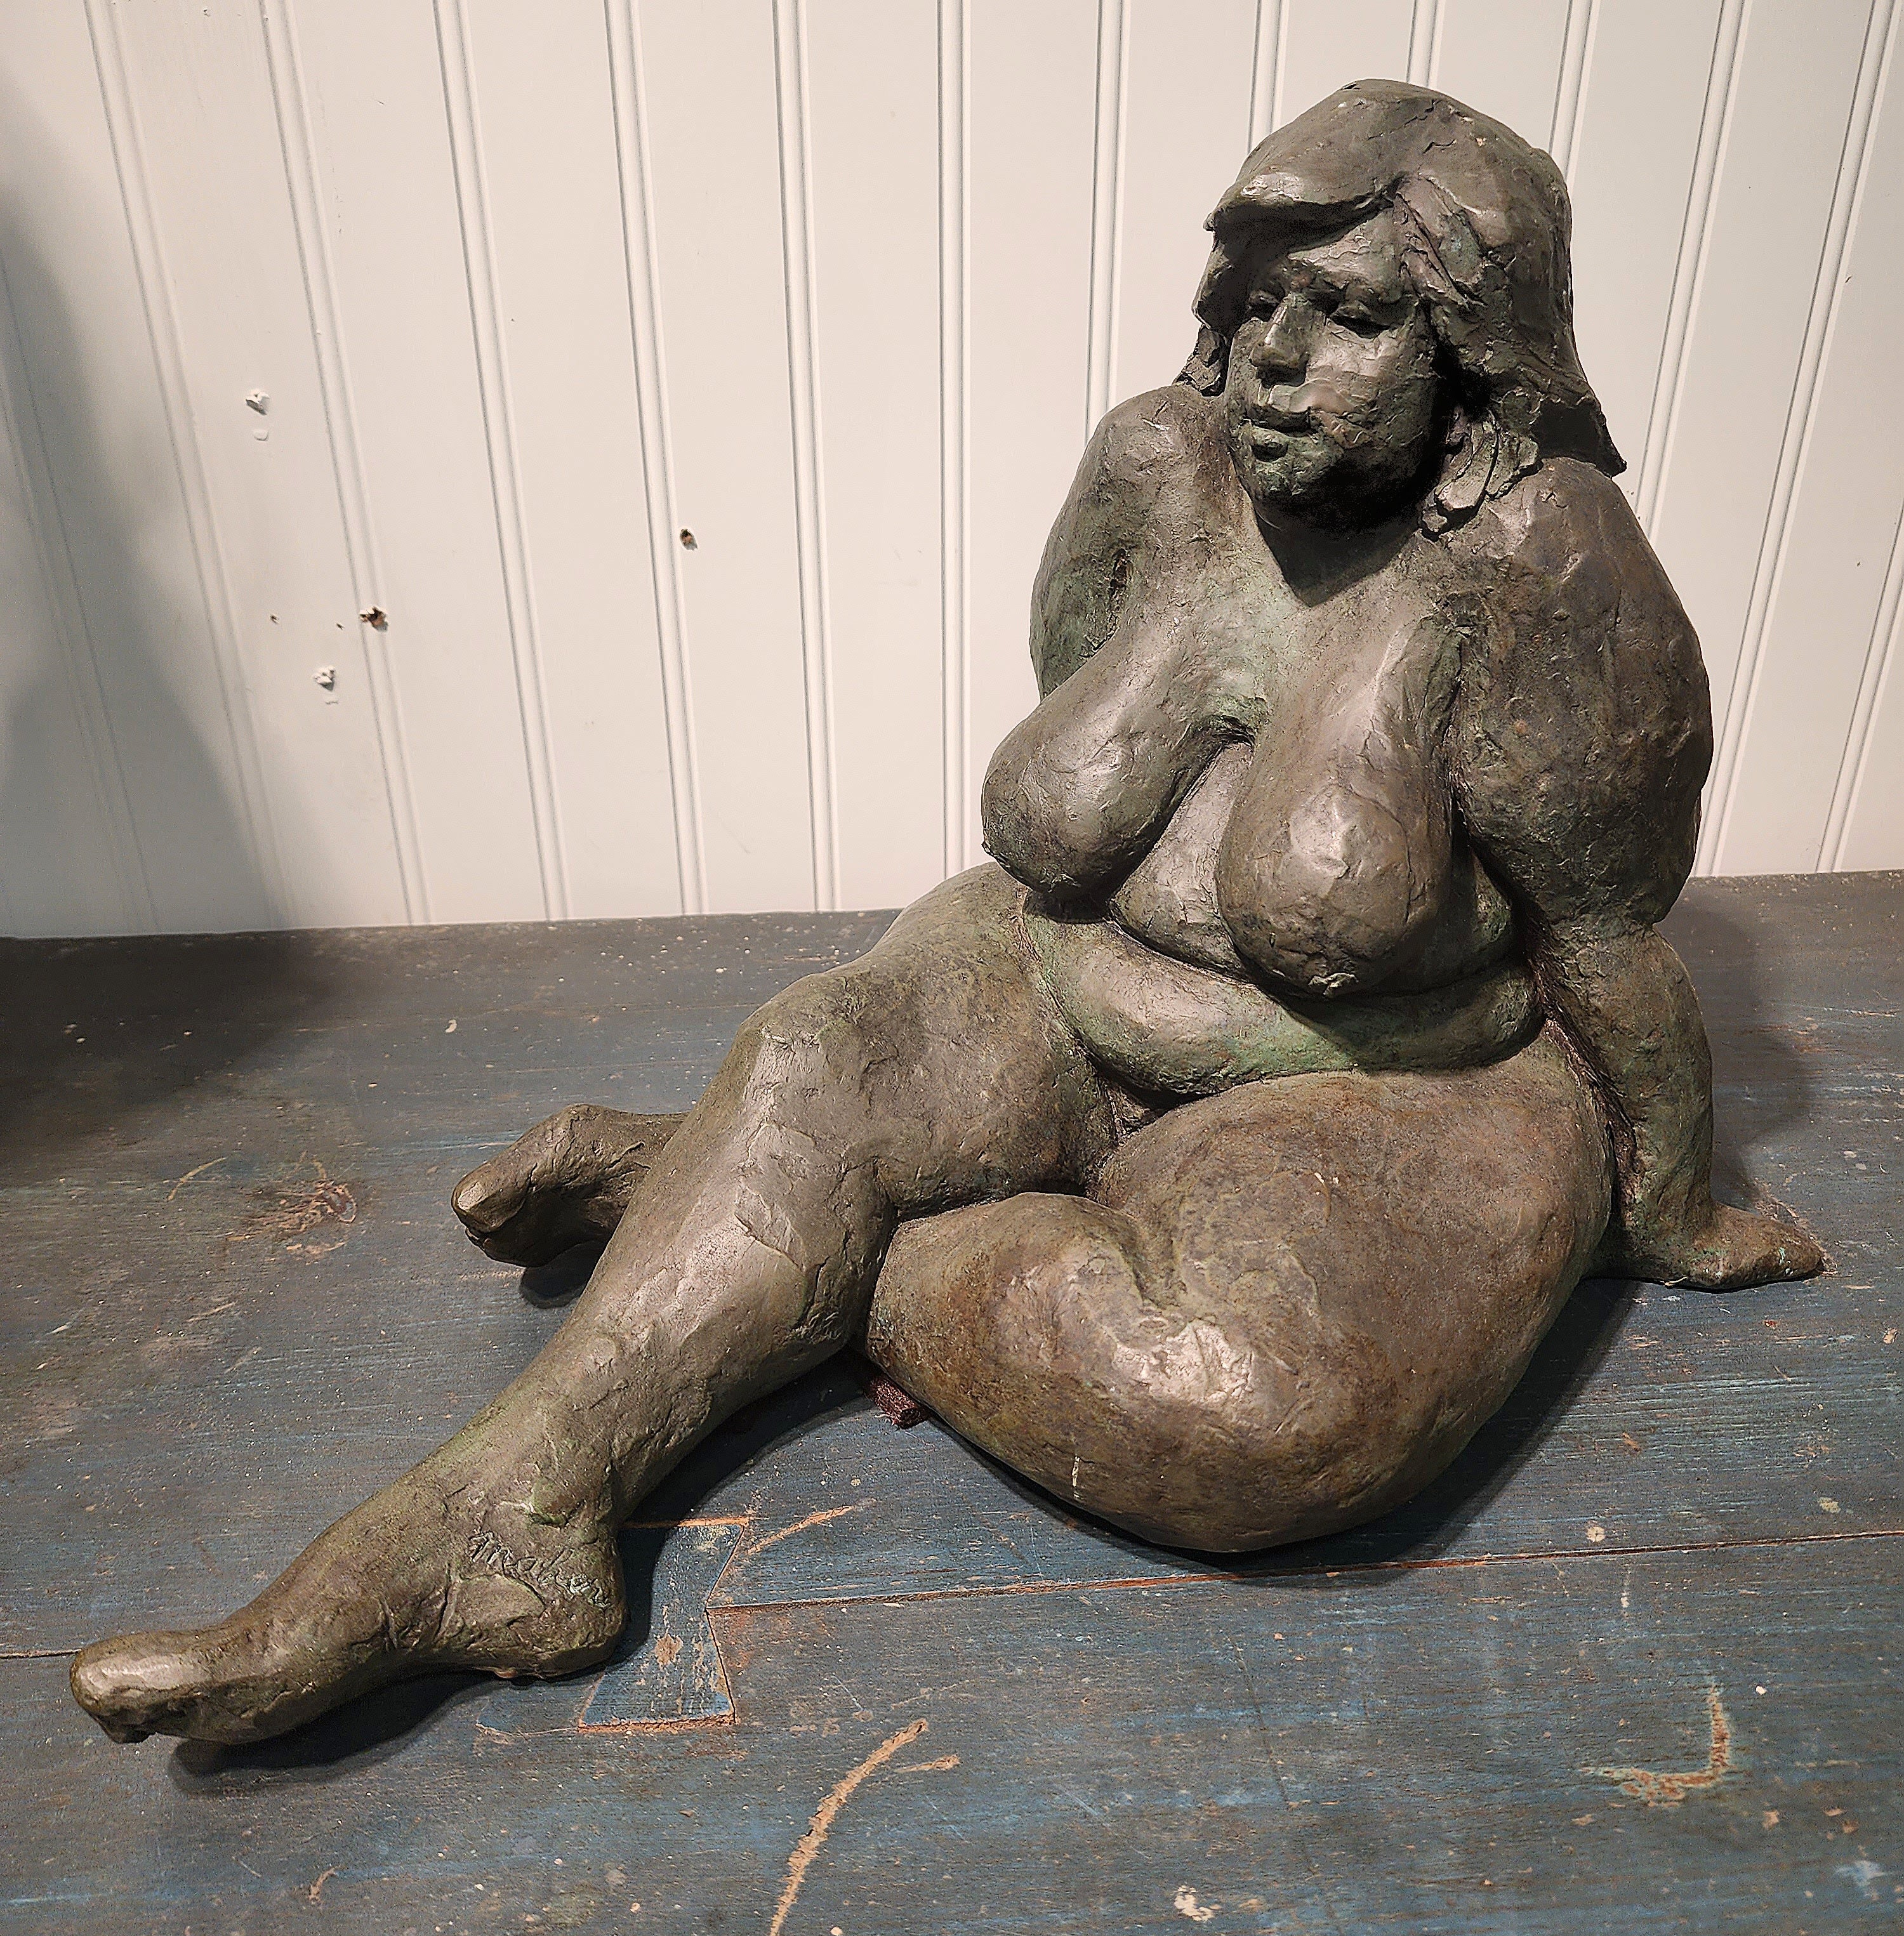 James Patrick Maher (20th Century), bronze Sculpture of a nude woman.
James P. Maher, was a renowned artist whose drawings, paintings and sculptures reflected an innate appreciation for the human form in all its beauty and imperfections.   His work